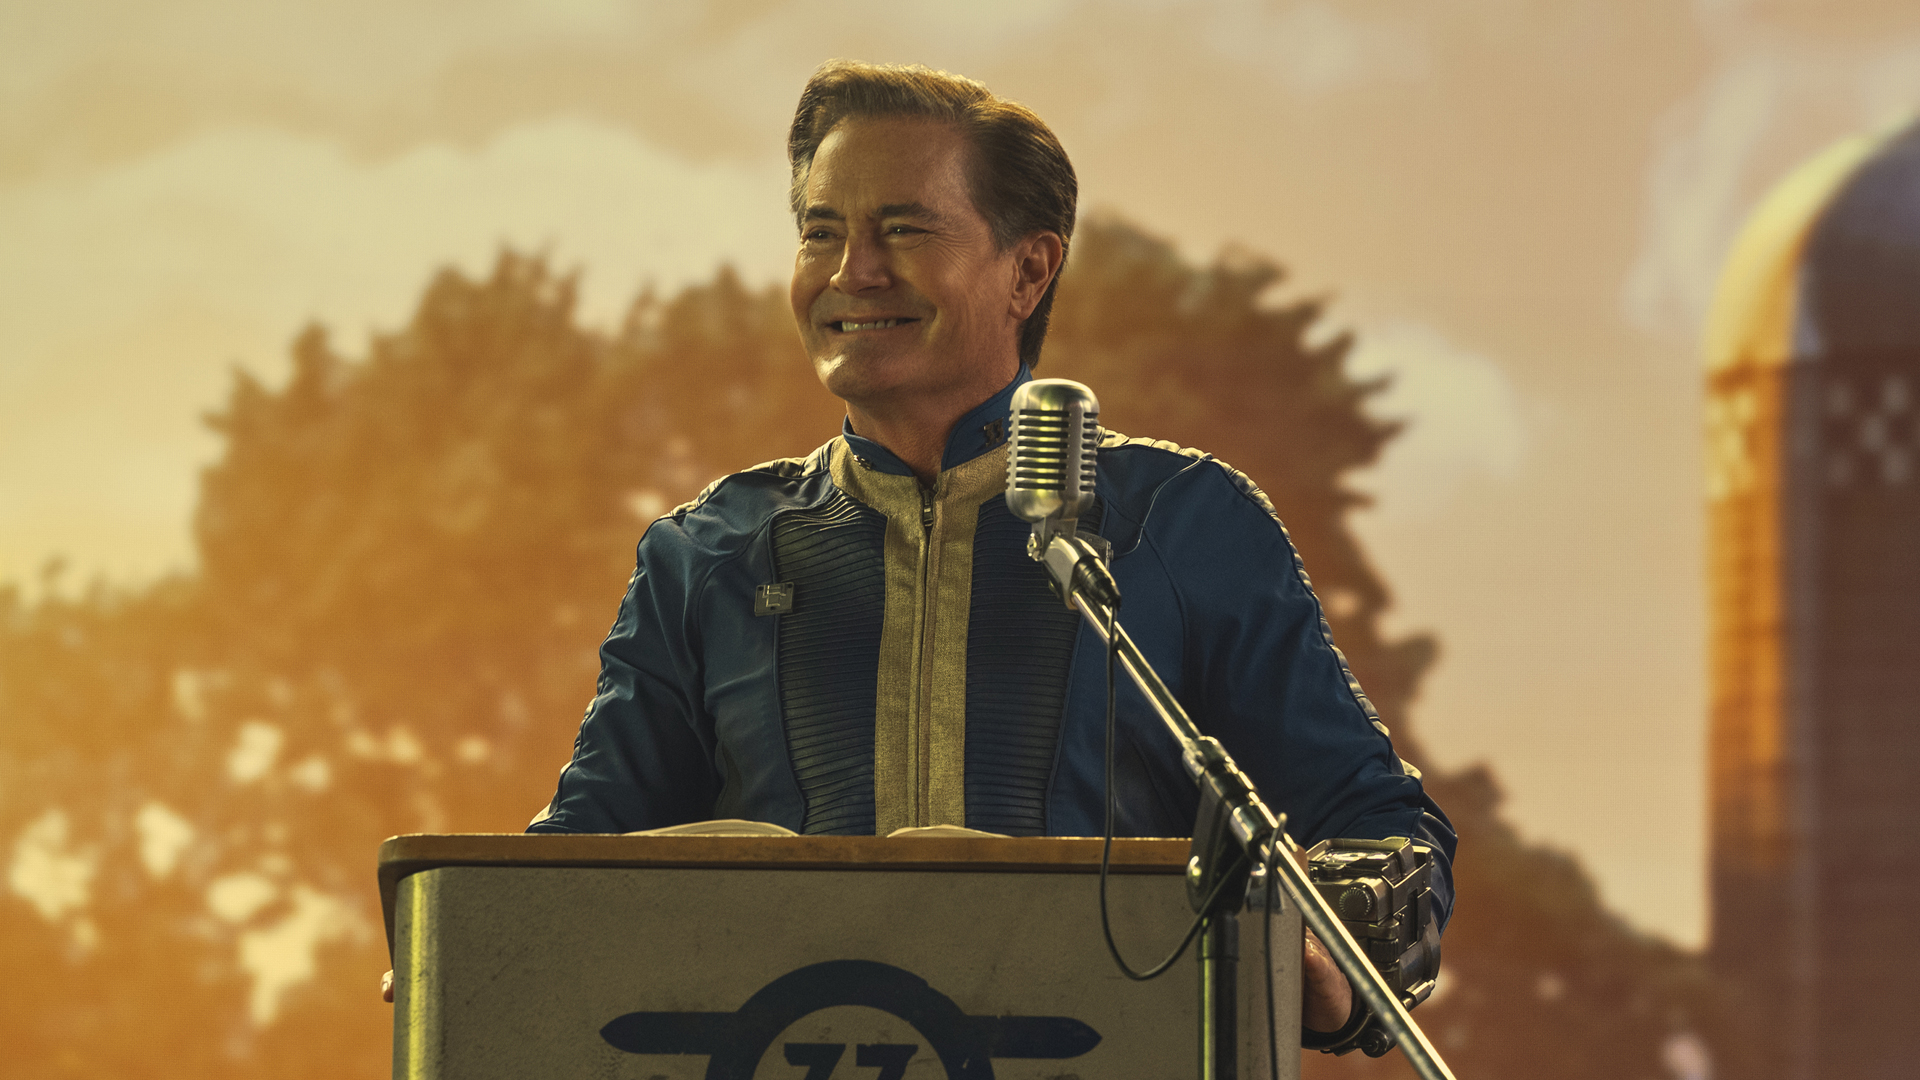 Hank MacLean gives a speech at a podium in Amazon's Fallout TV series